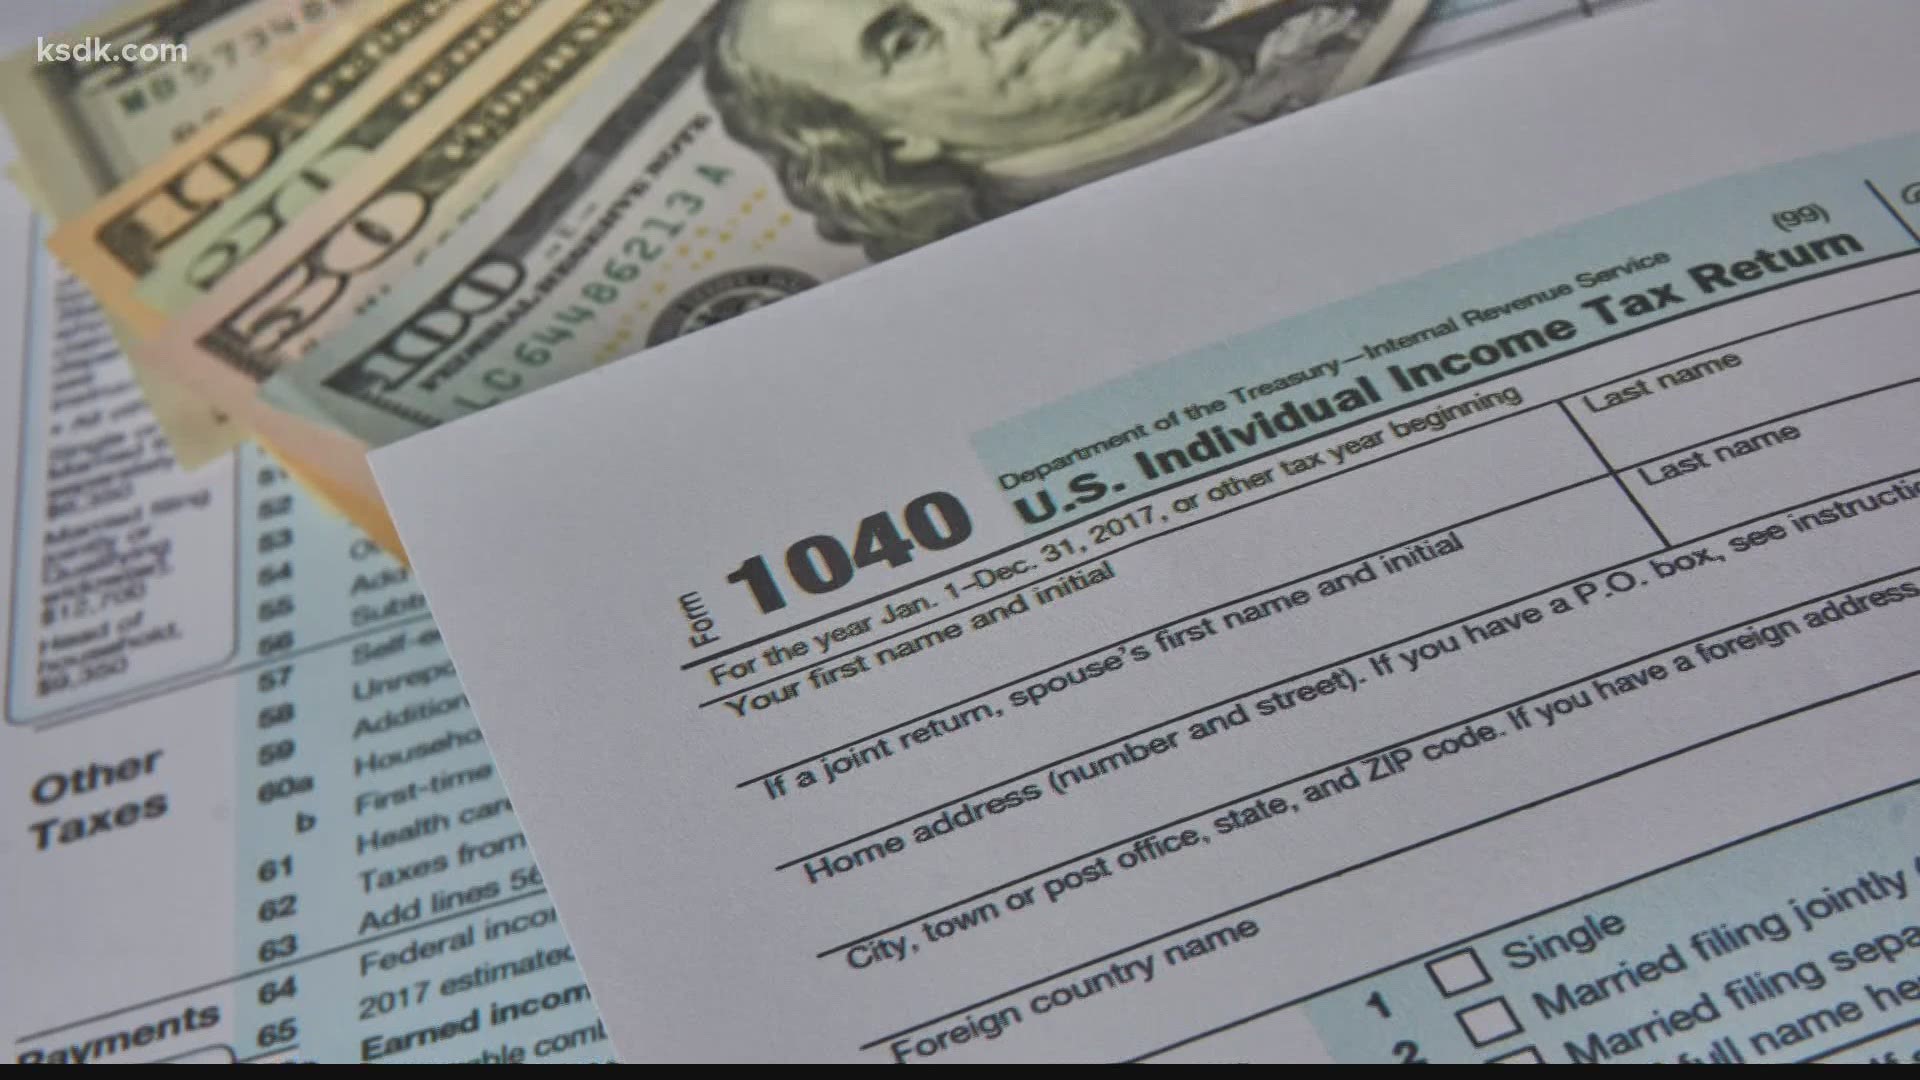 How to file your taxes if you received unemployment in 2020 | ksdk.com